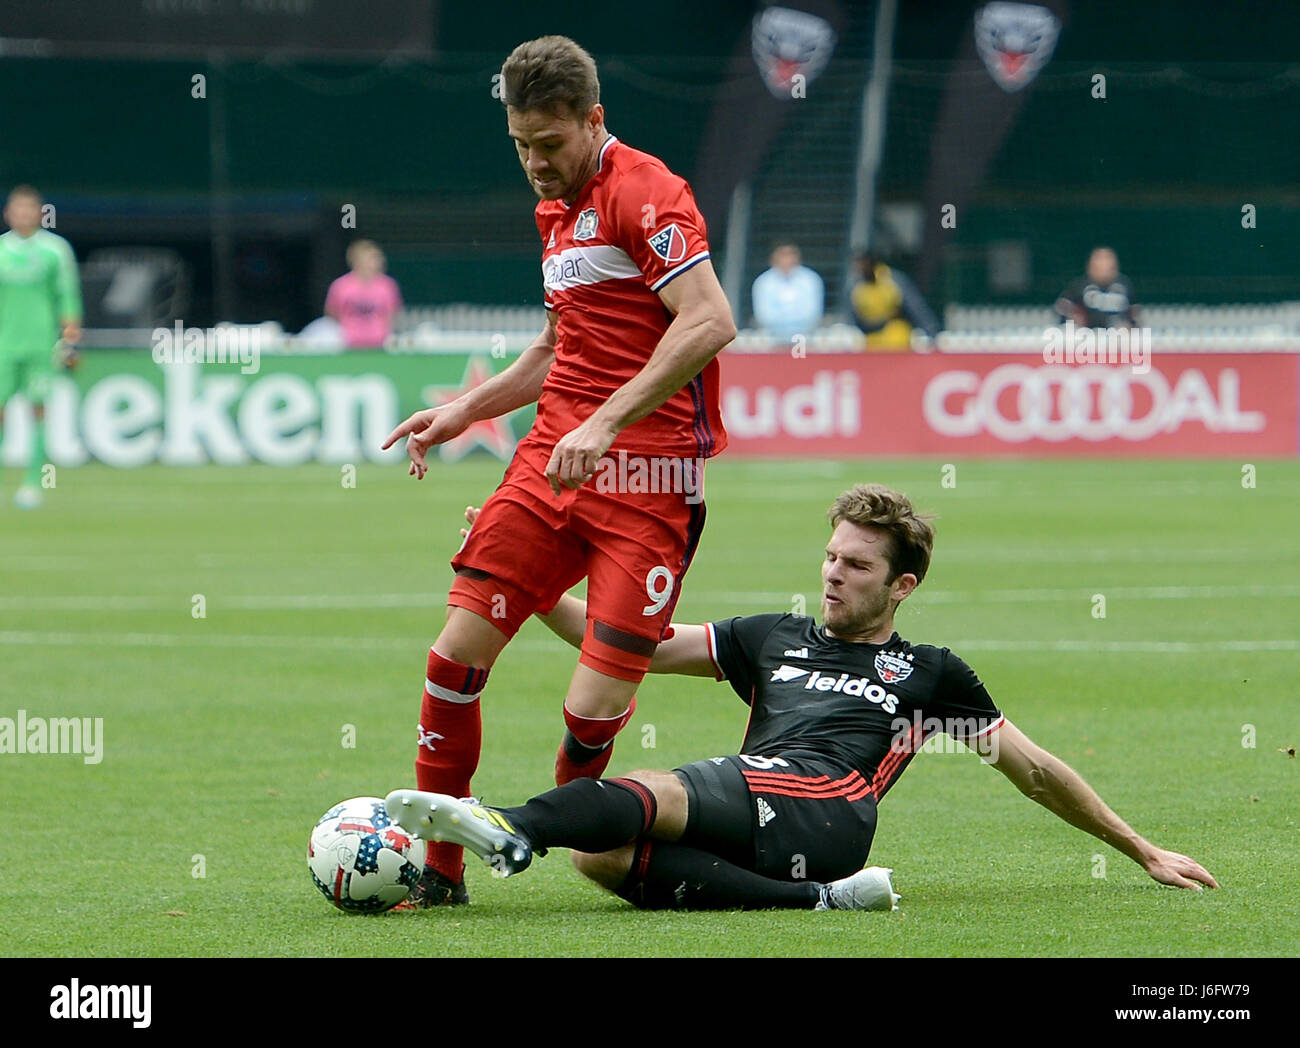 Washington, DC, USA. 20th May, 2017. 20170520 - D.C. United forward PATRICK MULLINS (16) makes a defensive play against Chicago Fire forward LUIS SOLIGNAC (9) in the first half at RFK Stadium in Washington. Credit: Chuck Myers/ZUMA Wire/Alamy Live News Stock Photo